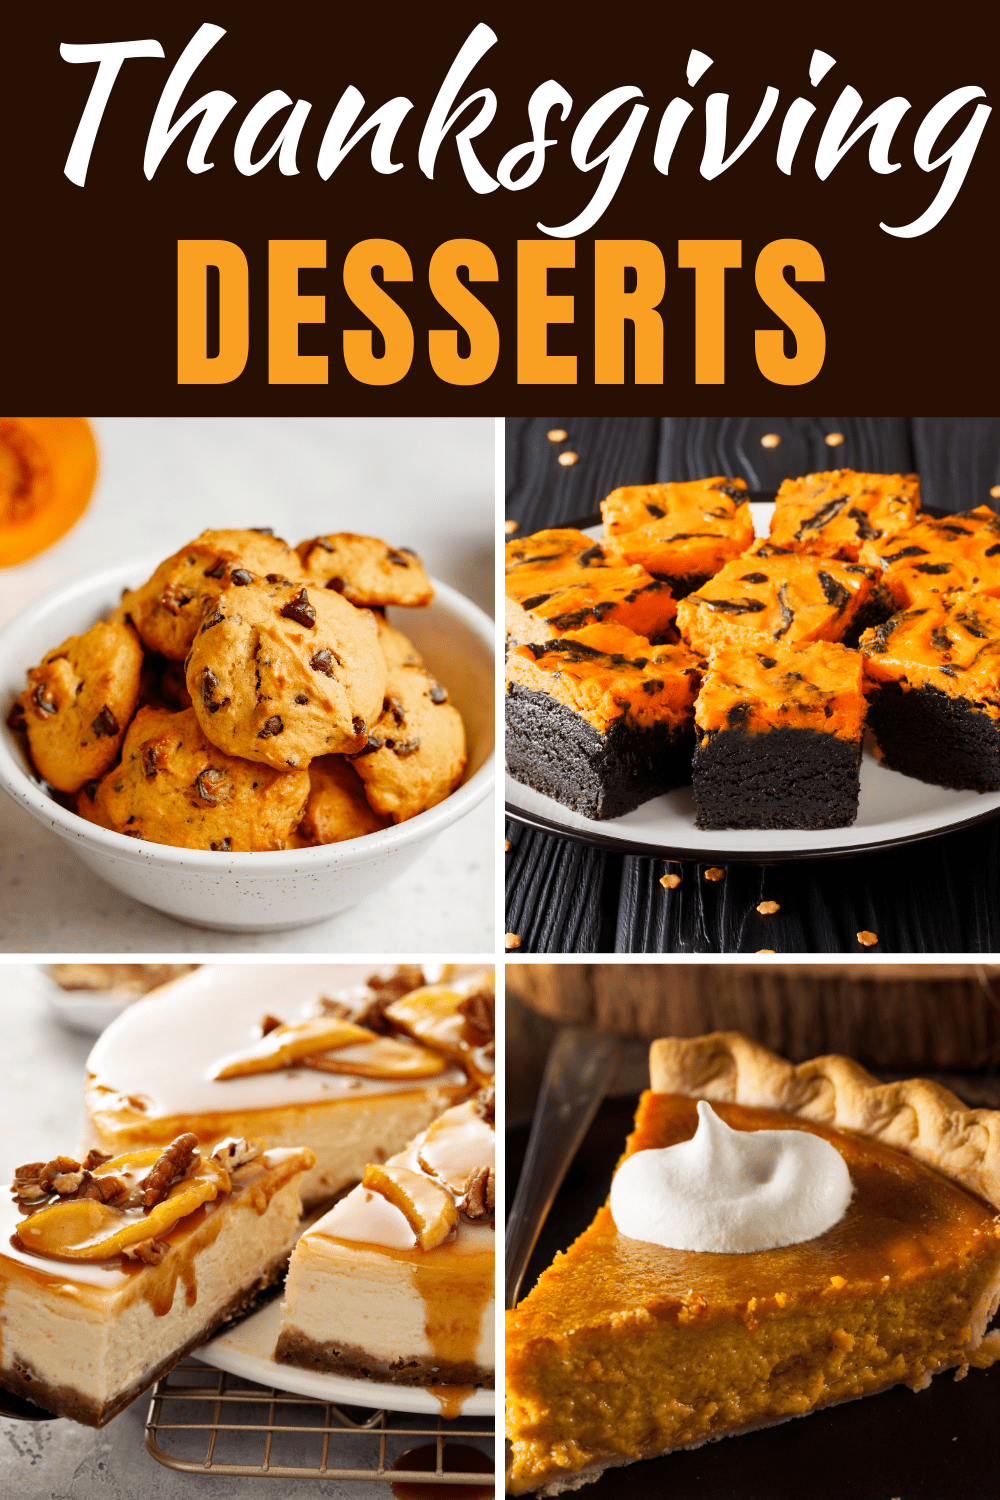 24 Best Thanksgiving Dessert Recipes to Wow Your Guests - Insanely Good